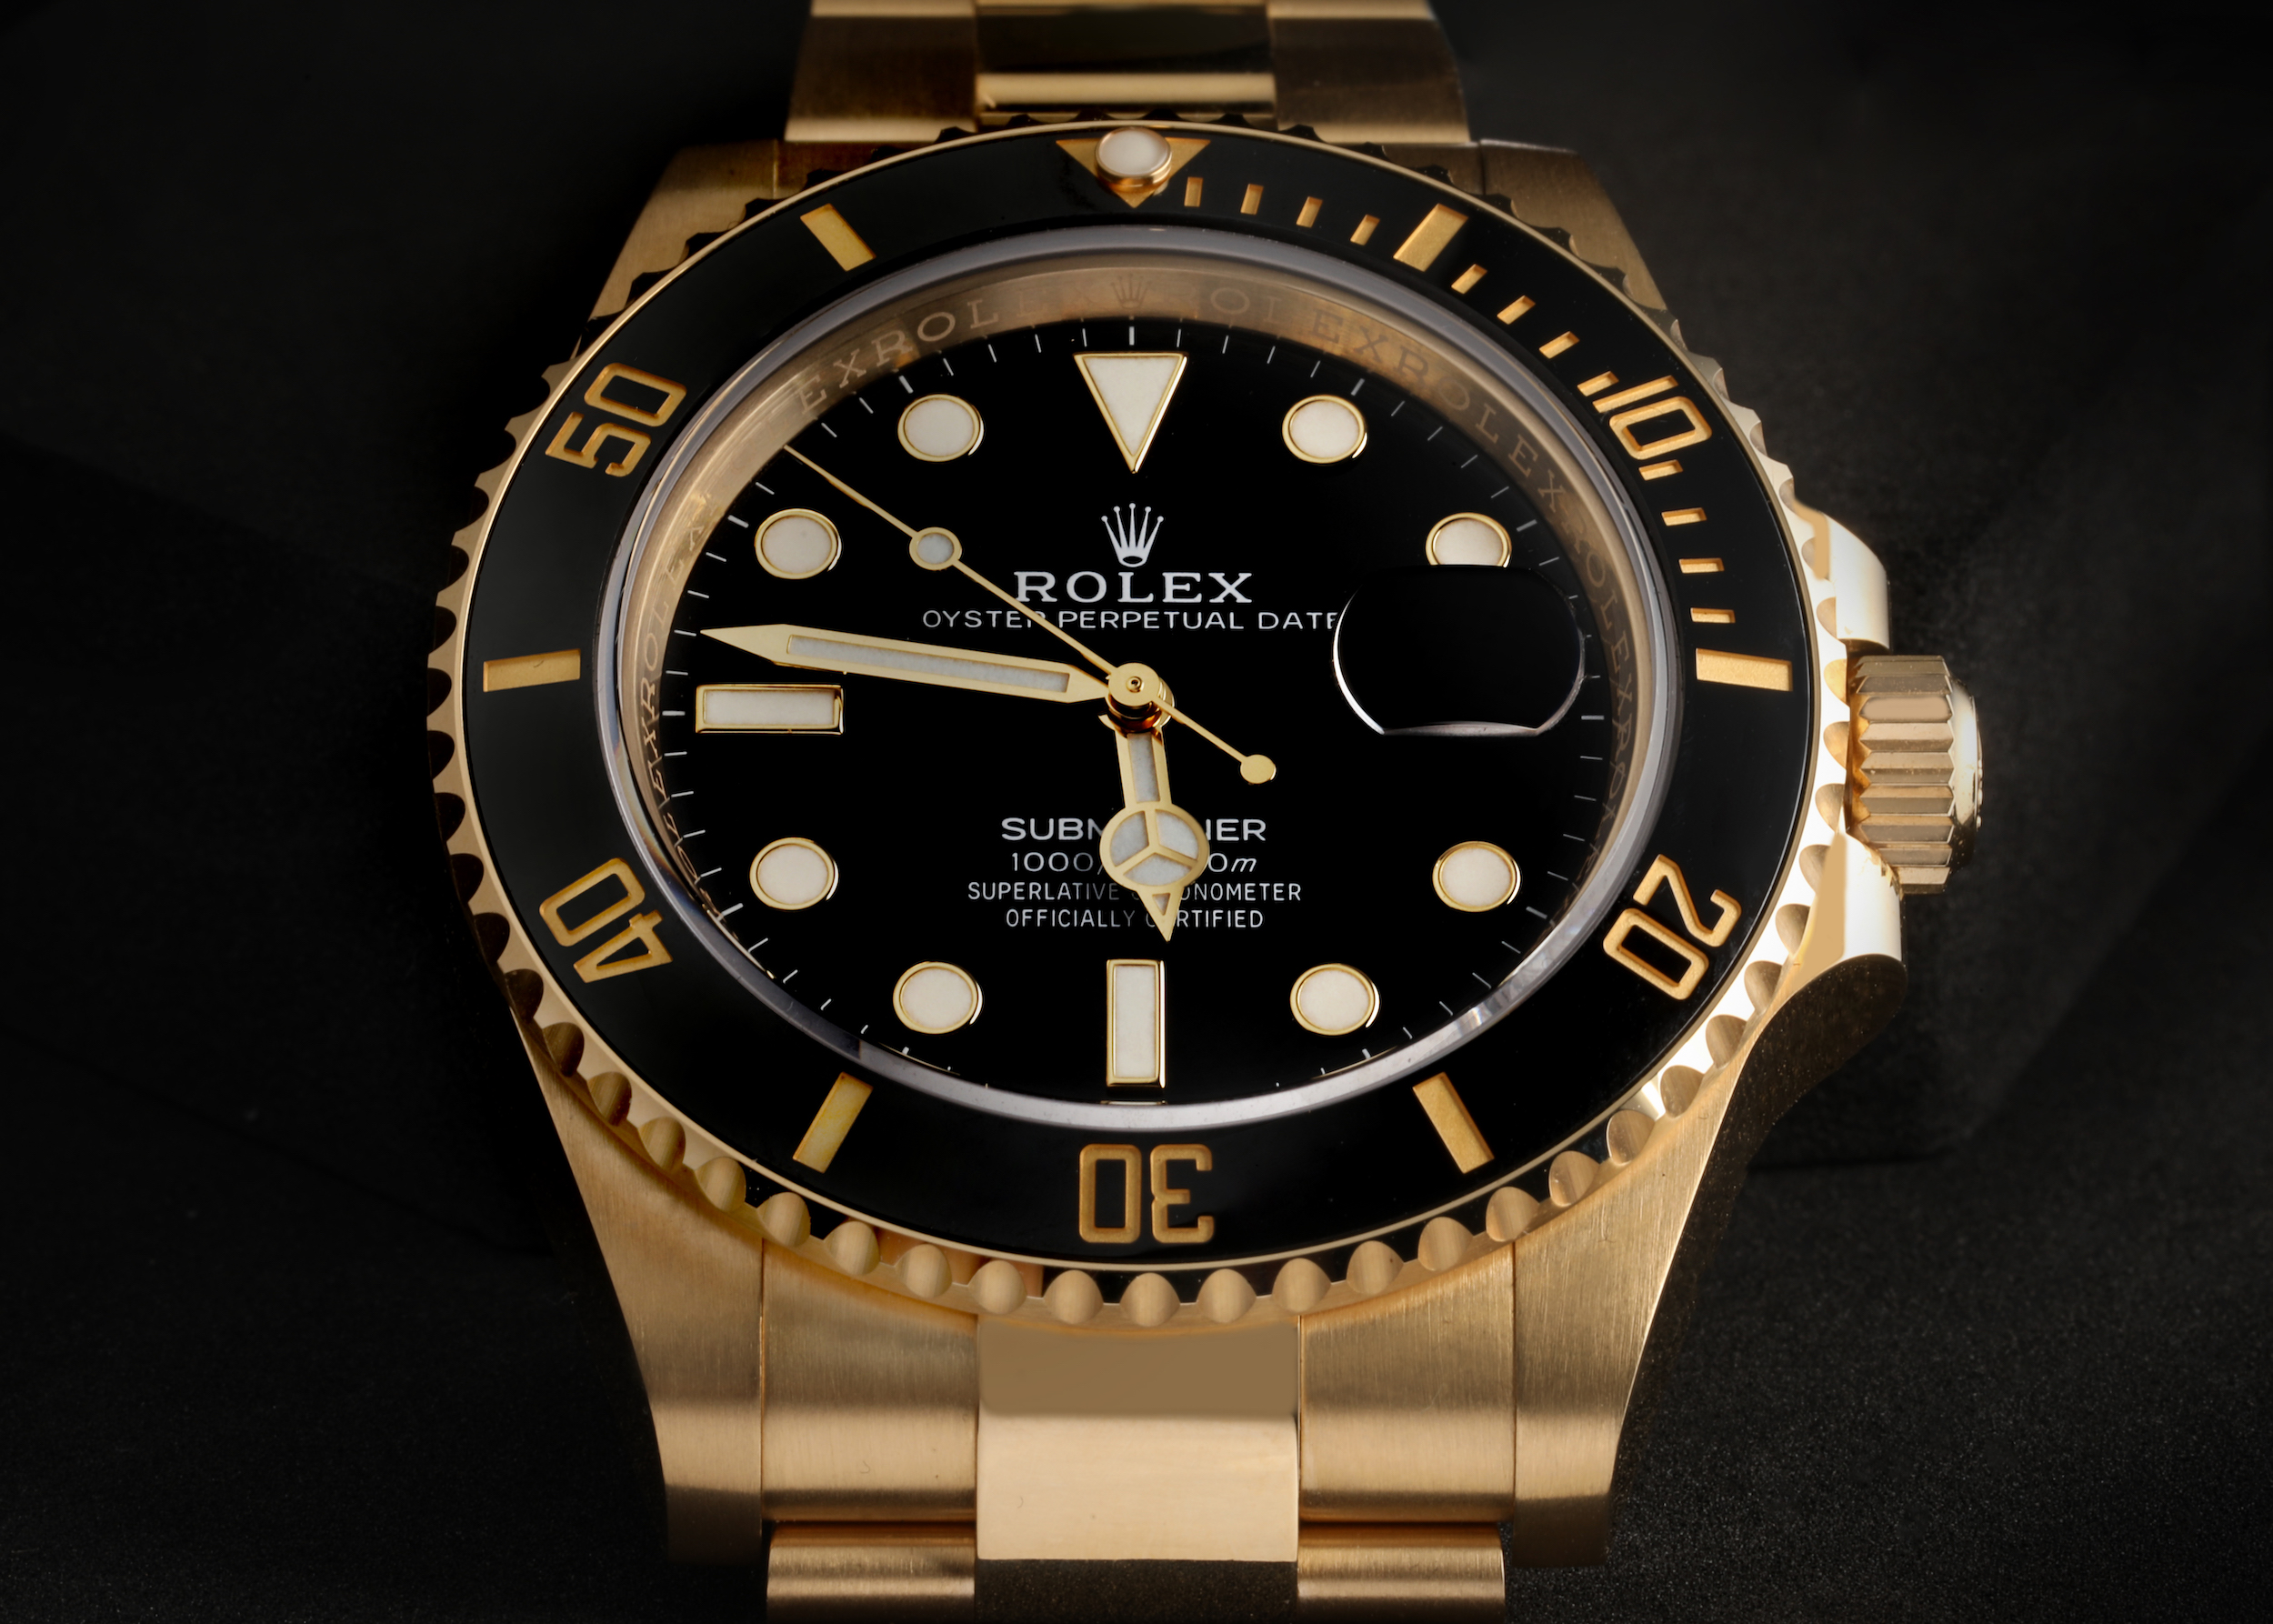 Rolex Submariner Yellow Gold Black Dial on Oyster 41mm